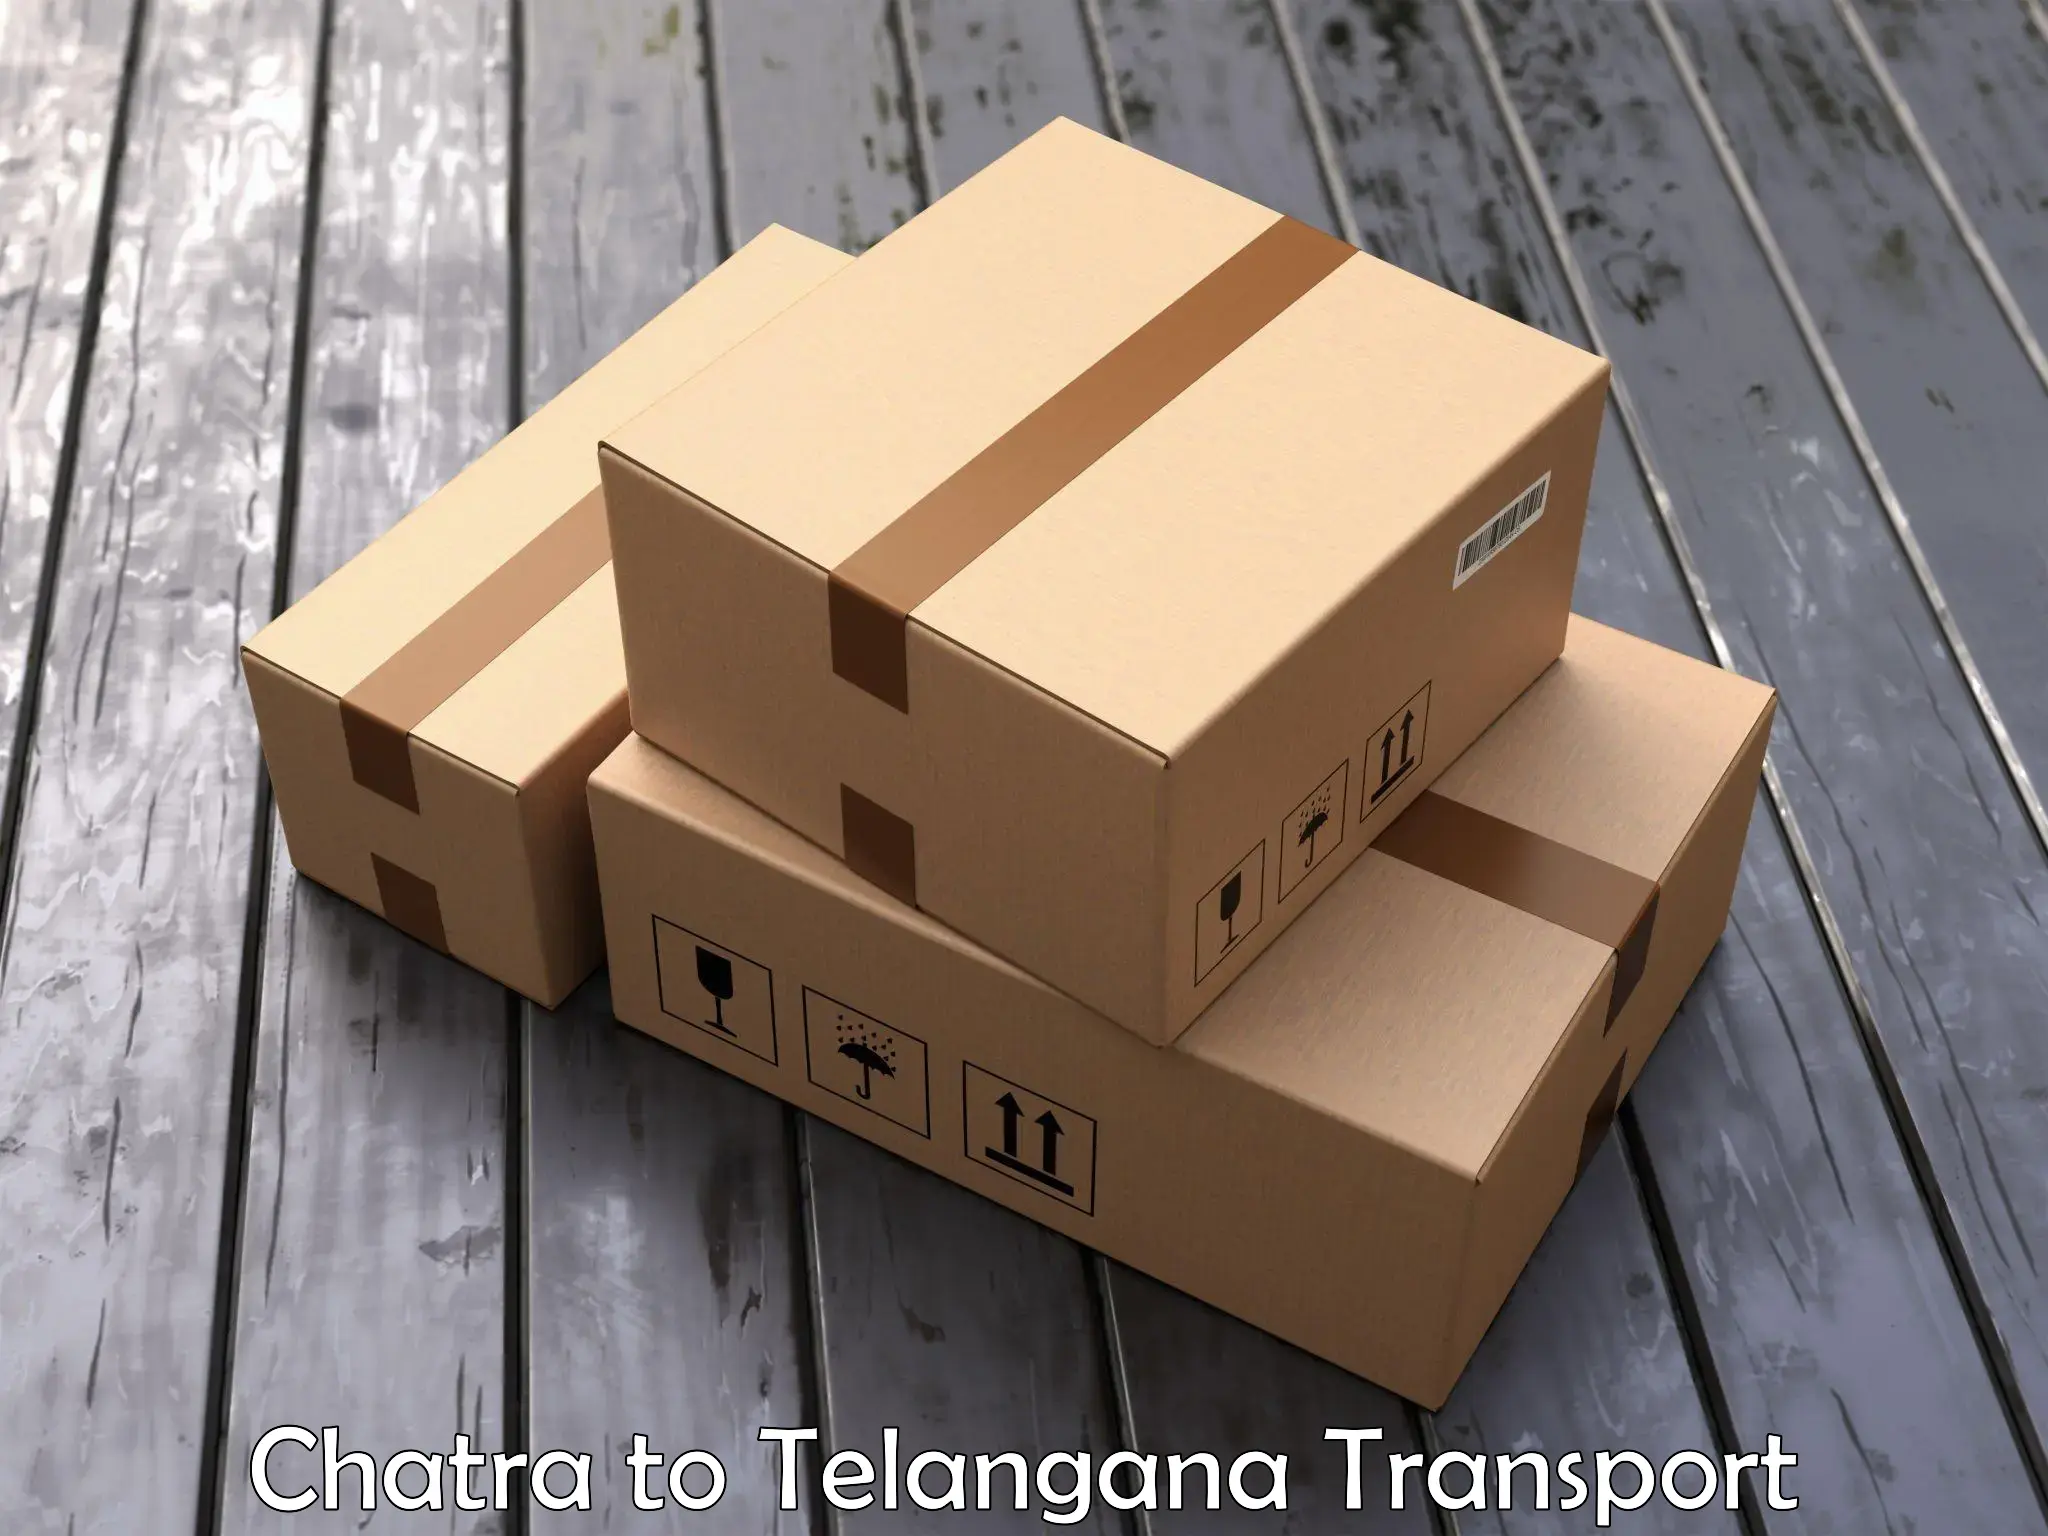 Truck transport companies in India Chatra to Hajipur Mancherial